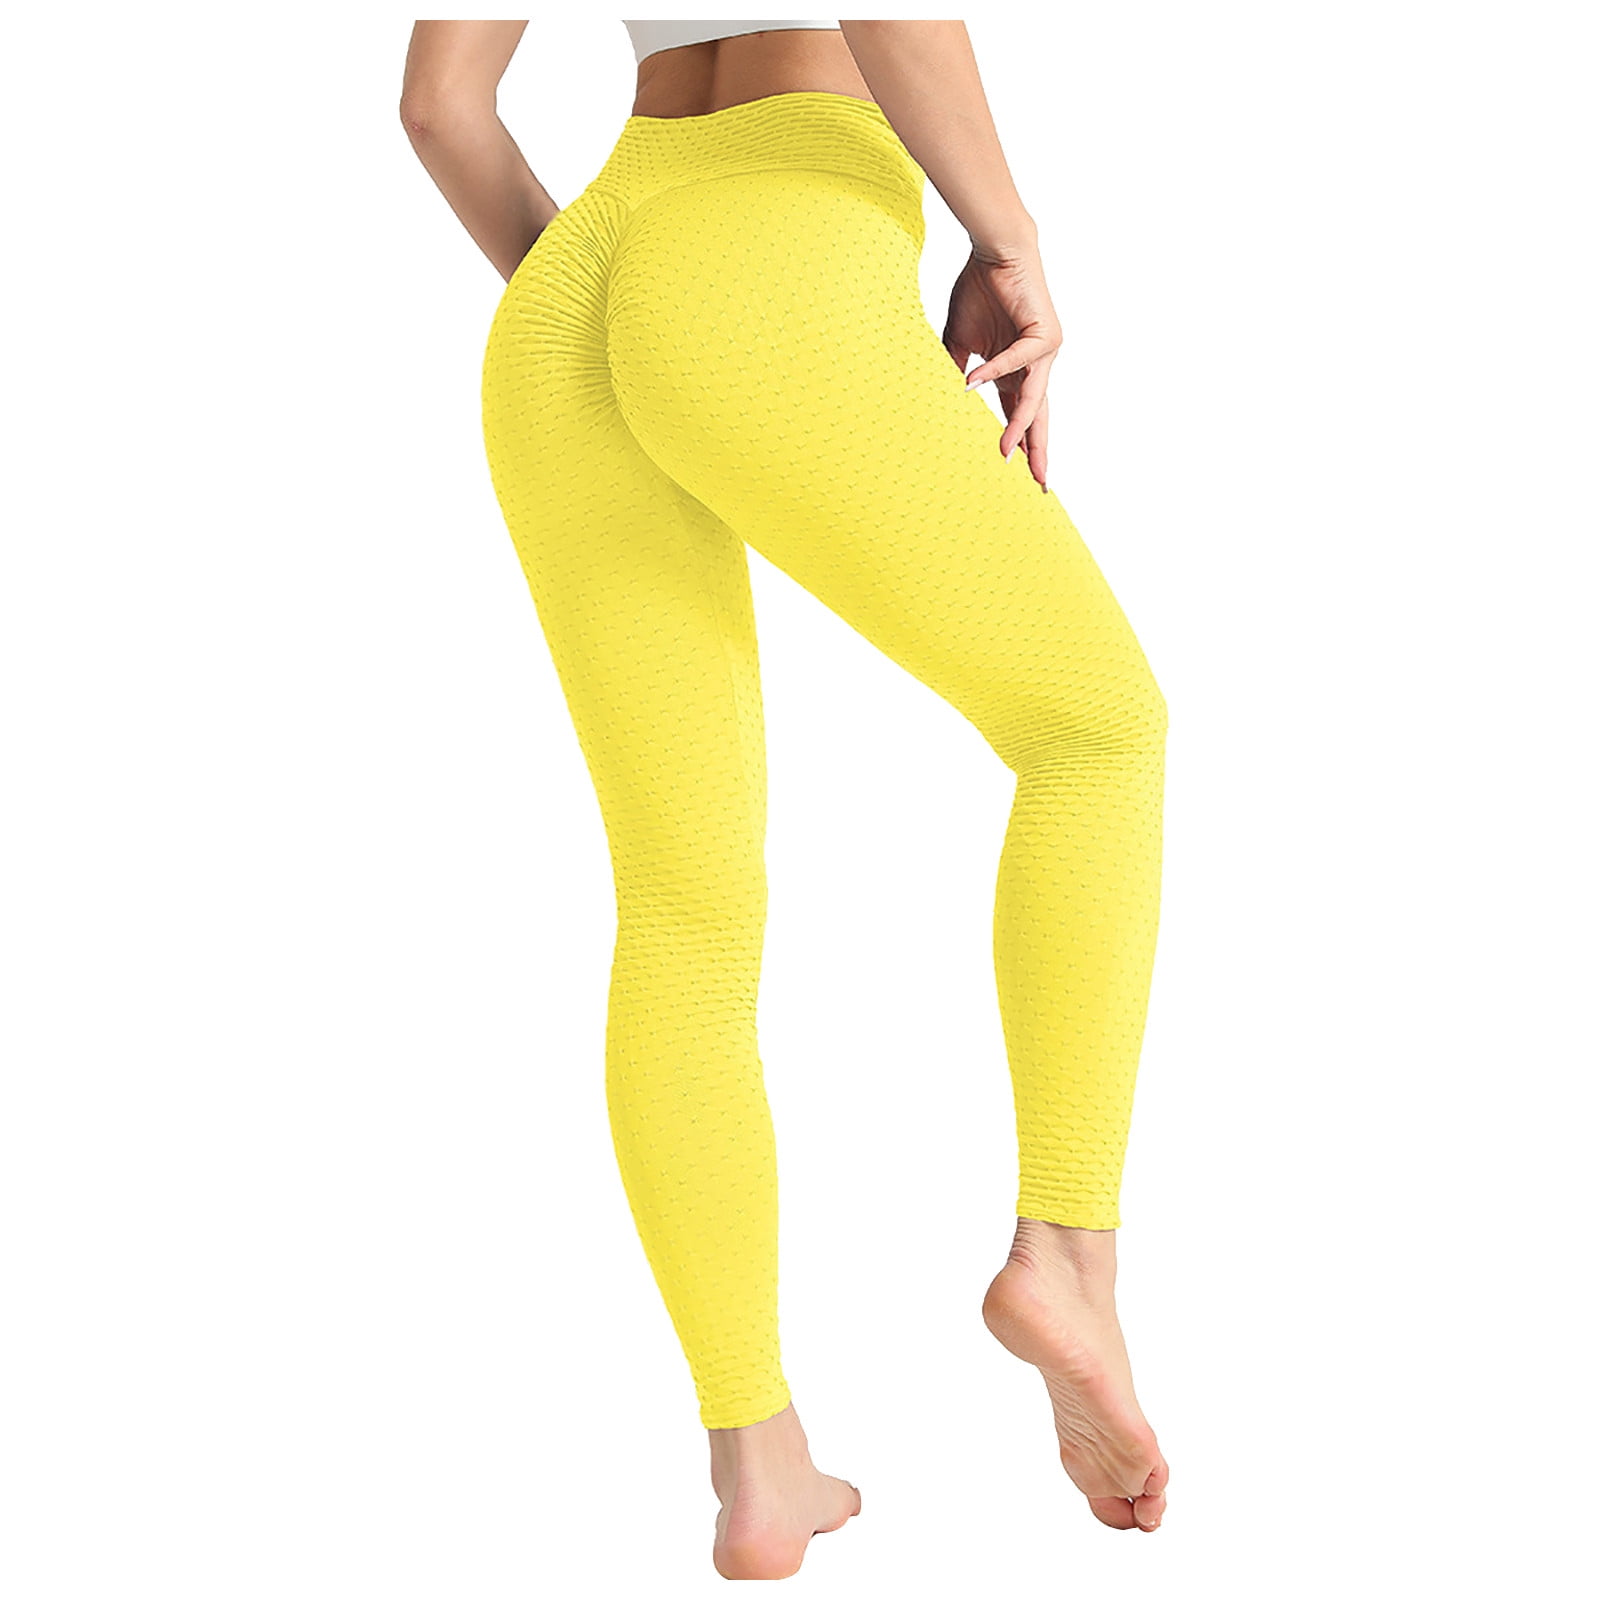 YYDGH Booty Leggings for Women Textured Scrunch Butt Lift Yoga Pants  Slimming Workout High Waisted Anti Cellulite Tights Yellow M - Walmart.com